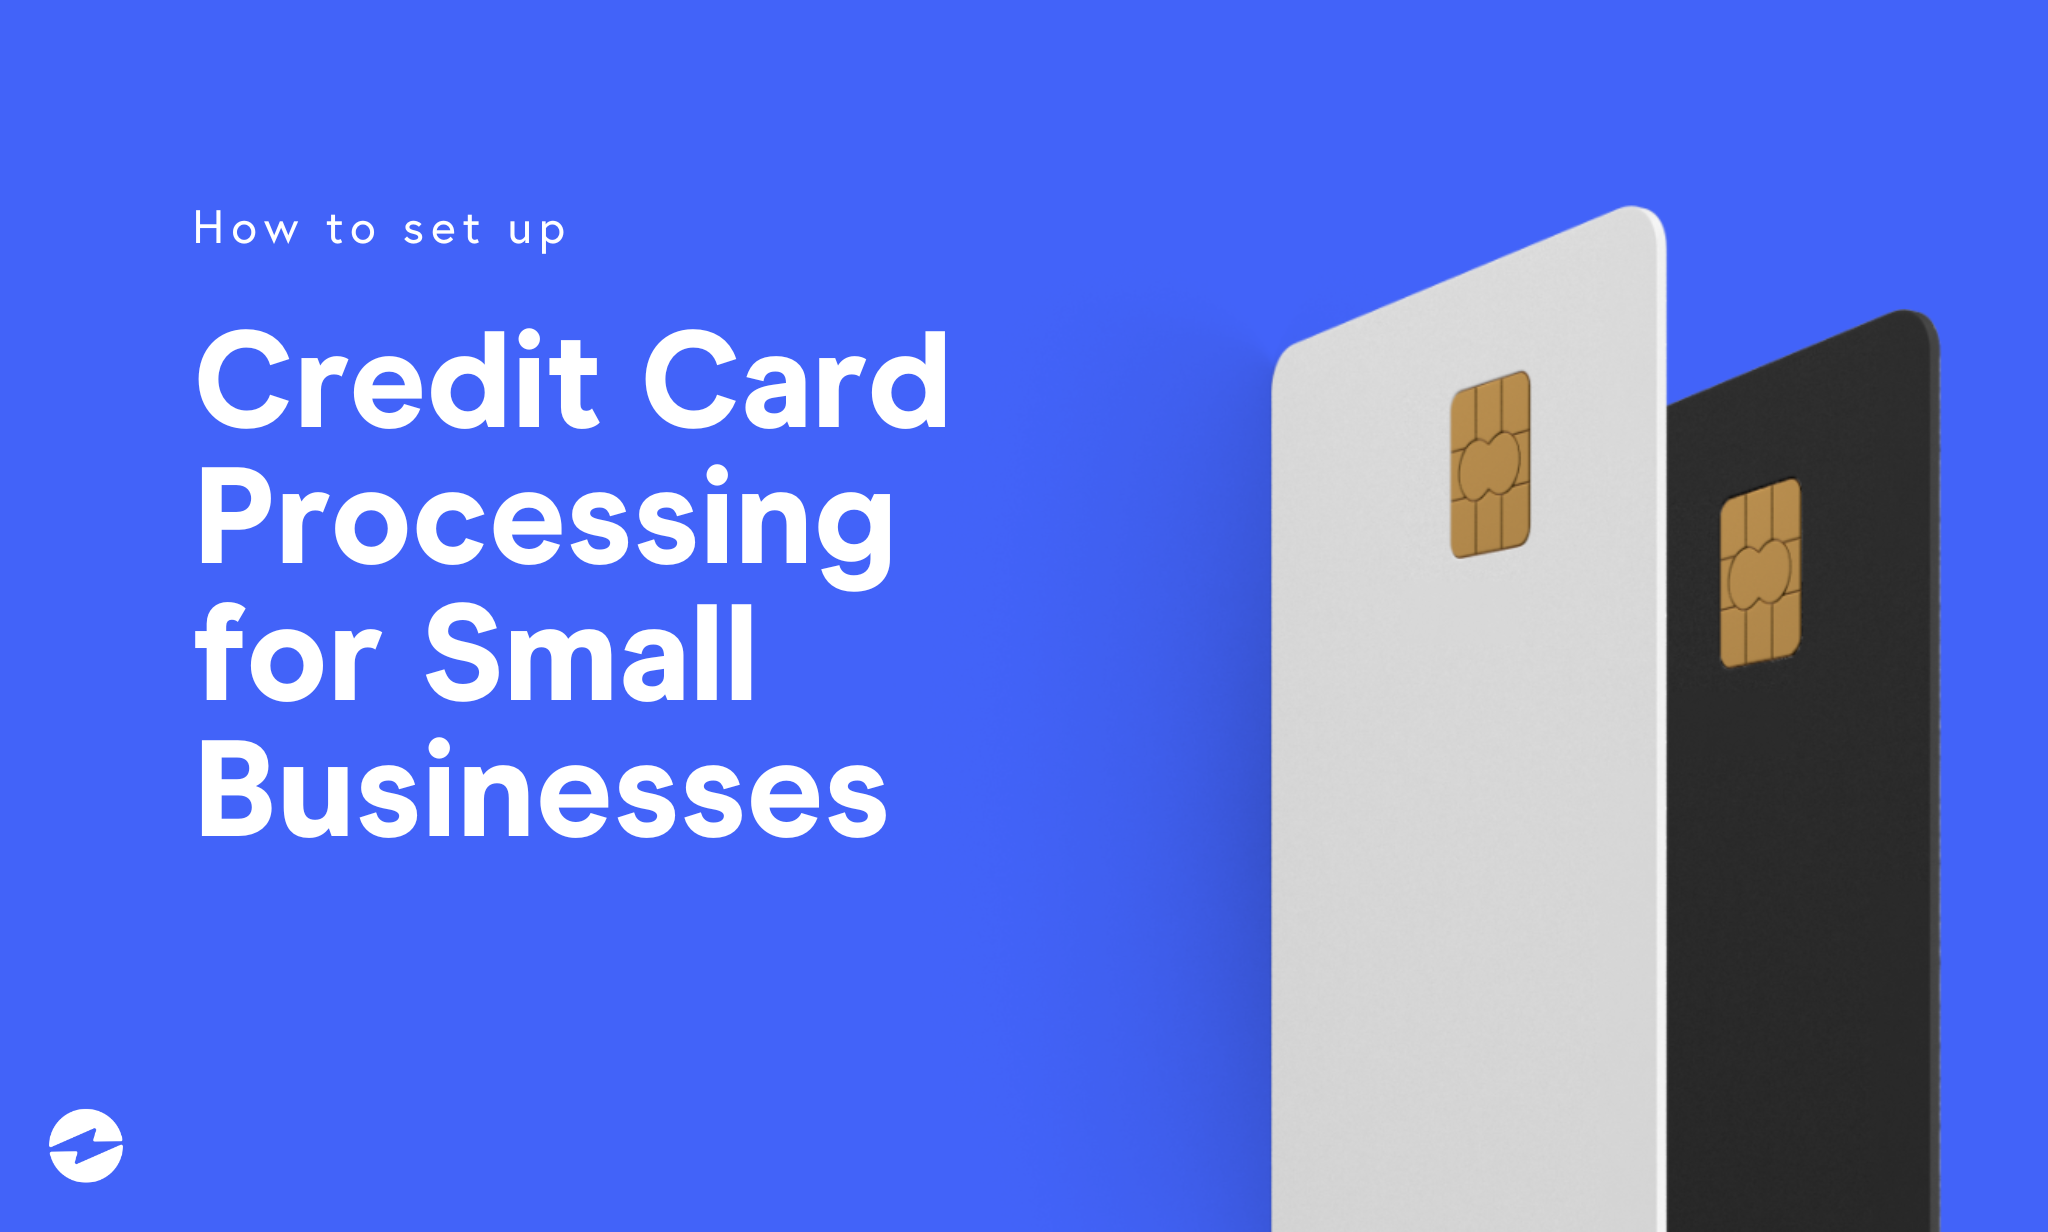 How to set up credit card processing for small business.